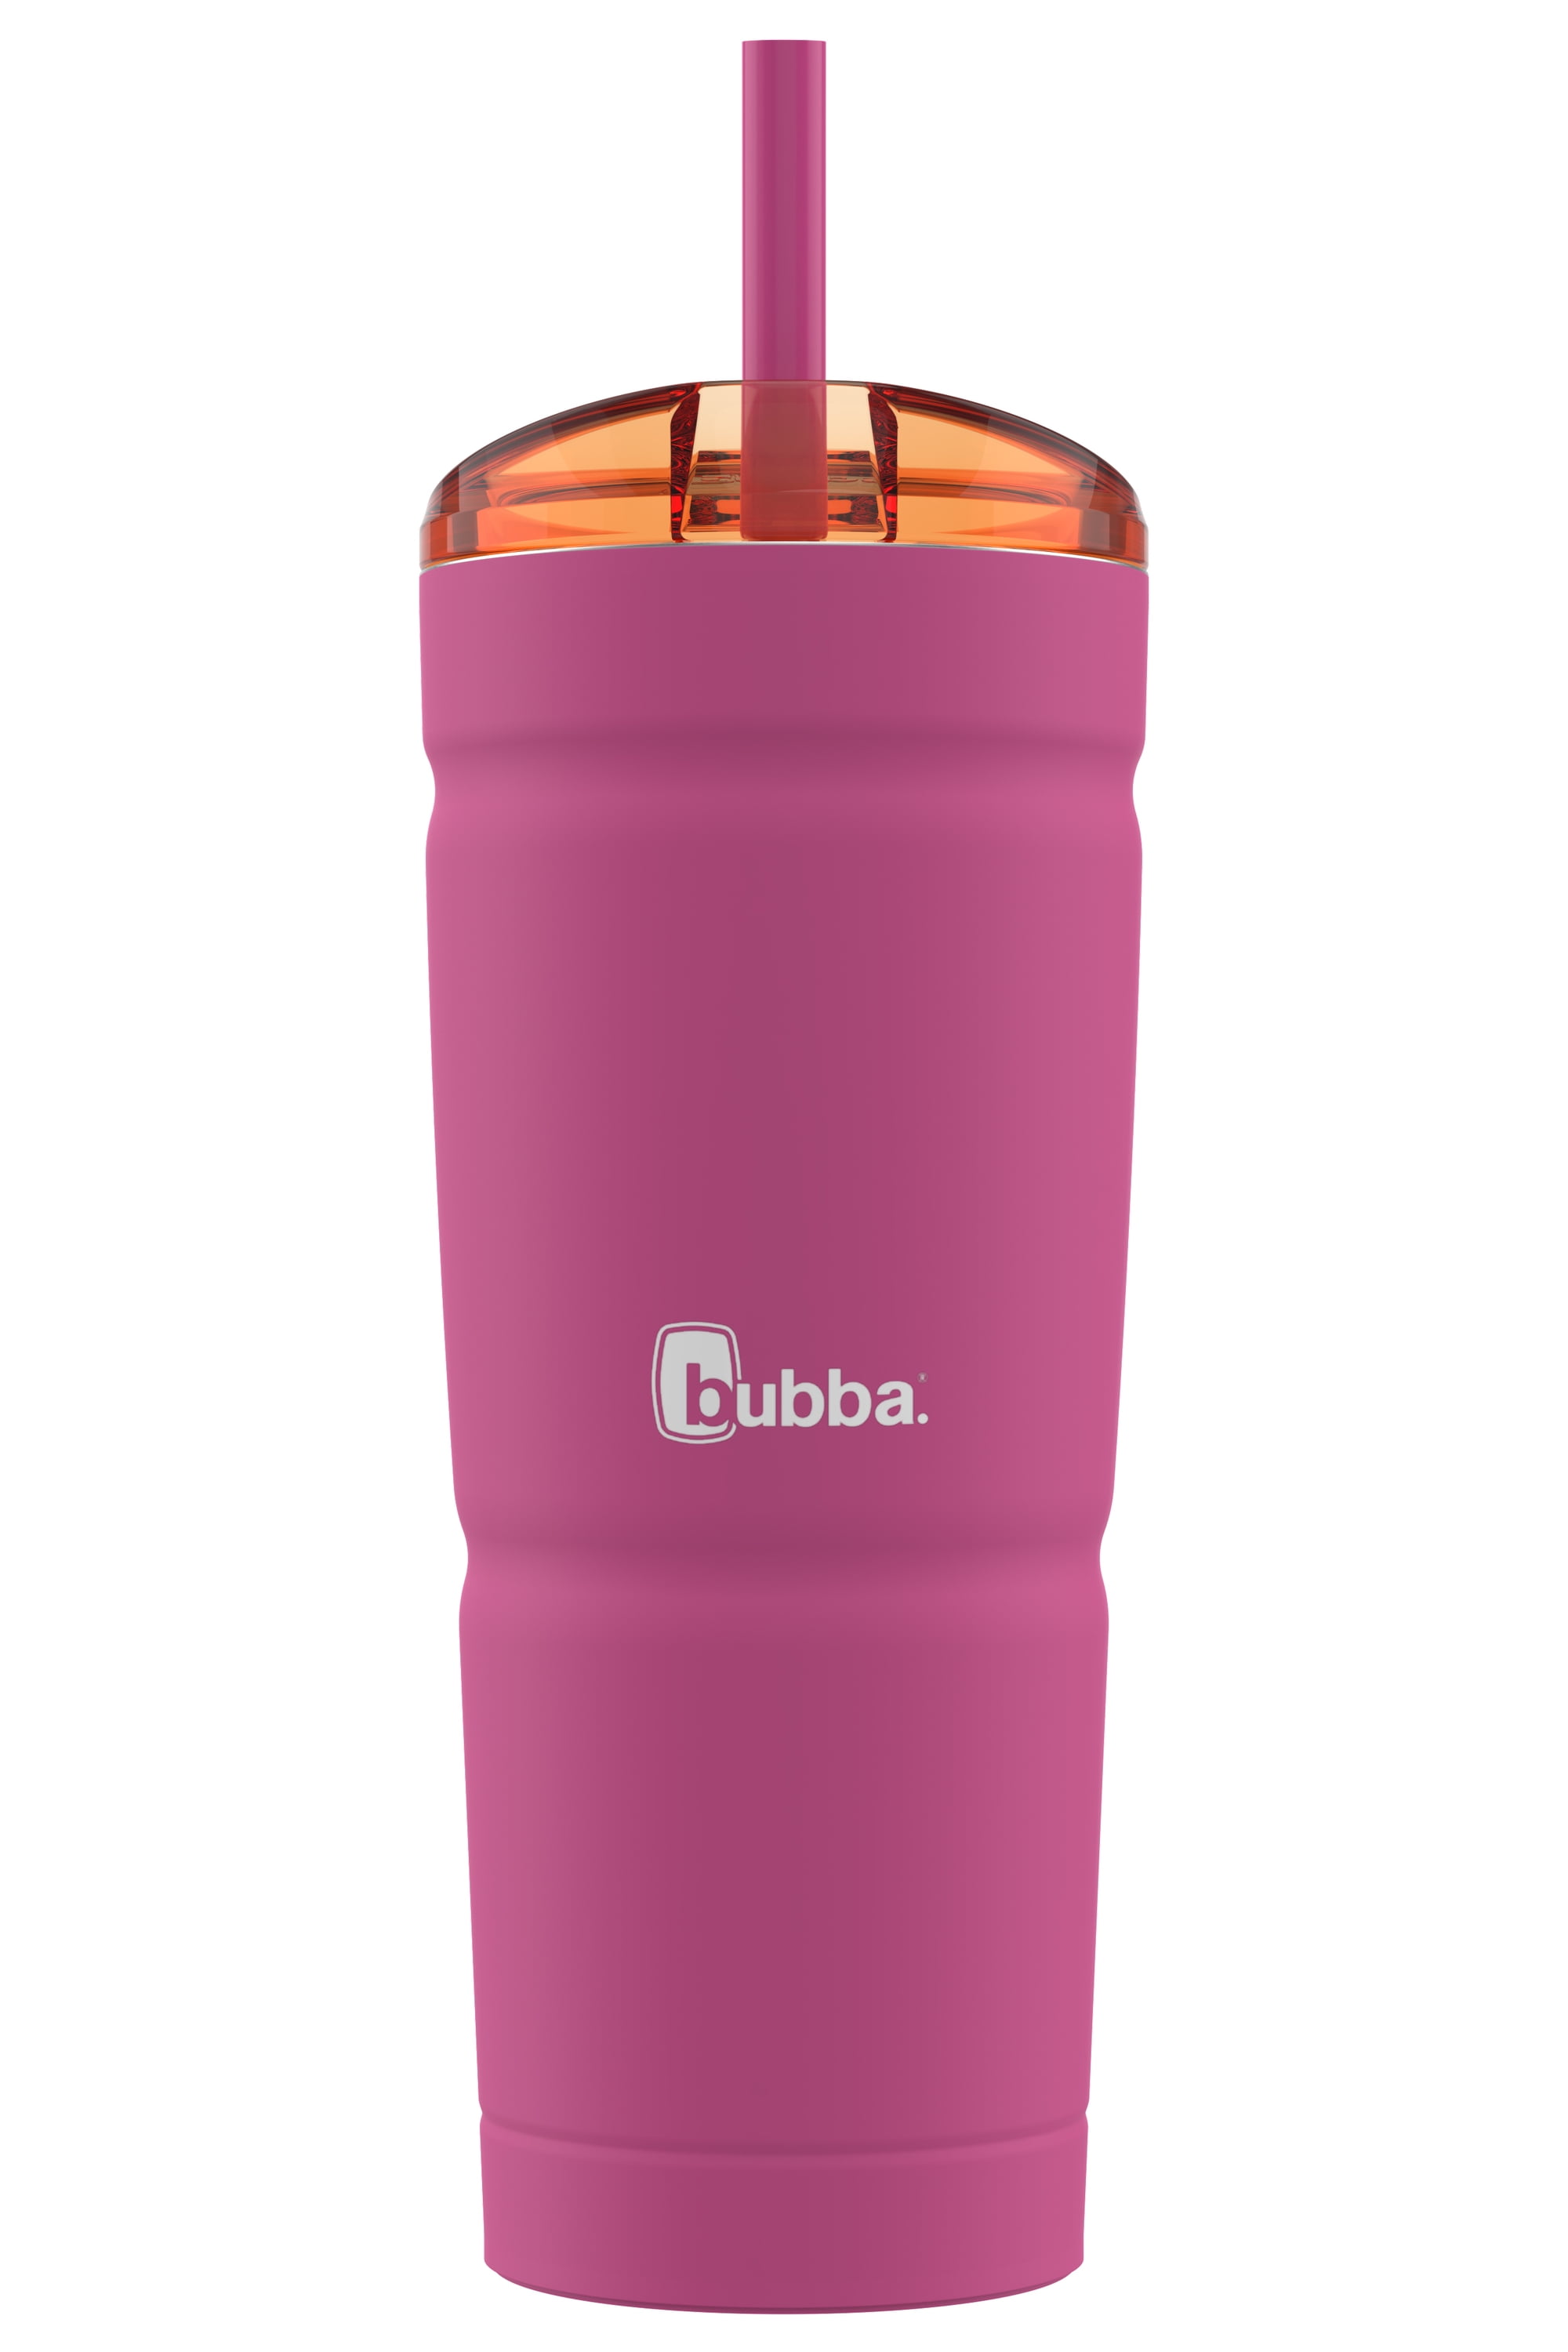 Bubba Envy S Vacuum-Insulated Stainless Steel Tumbler, 24oz, 2-Pack Tutti  Fruity & Licorice & Vacuum…See more Bubba Envy S Vacuum-Insulated Stainless